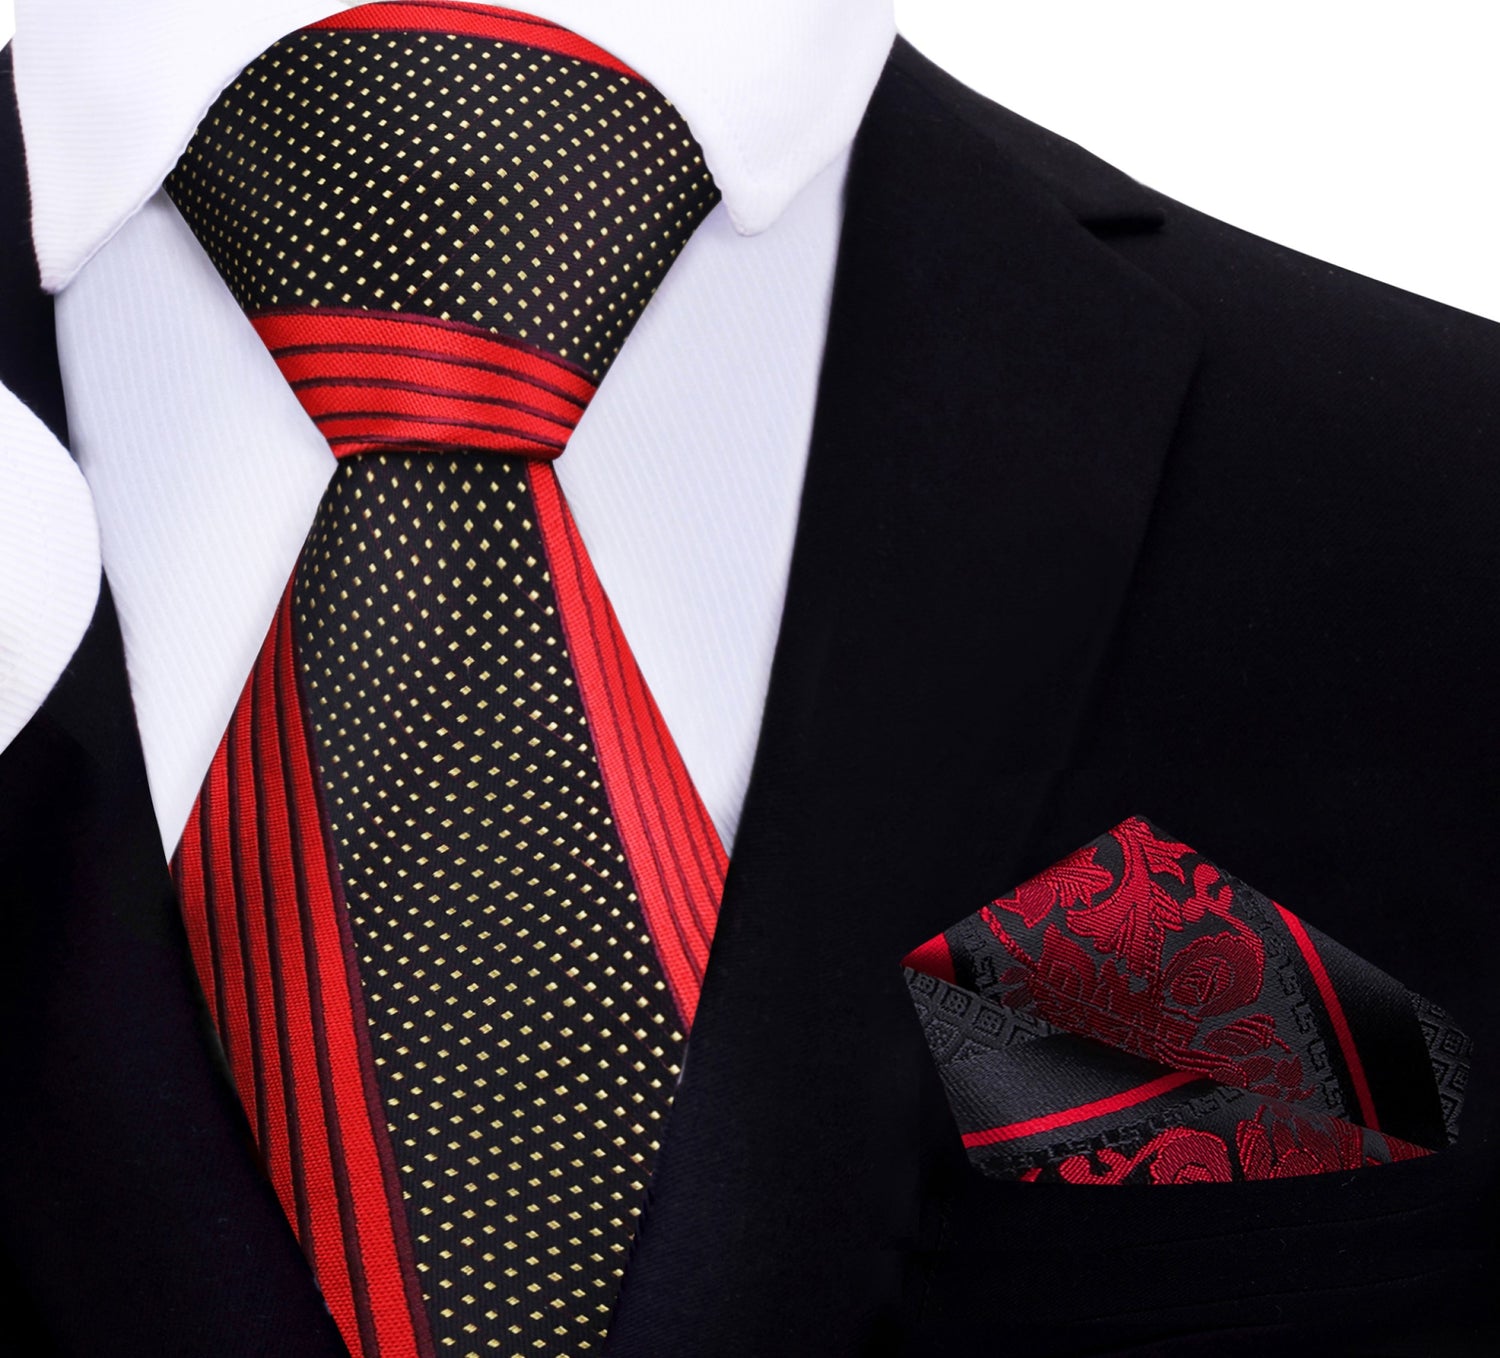 Red, Black and Gold Abstract Tie and Accenting Red Black Paisley Pocket Square